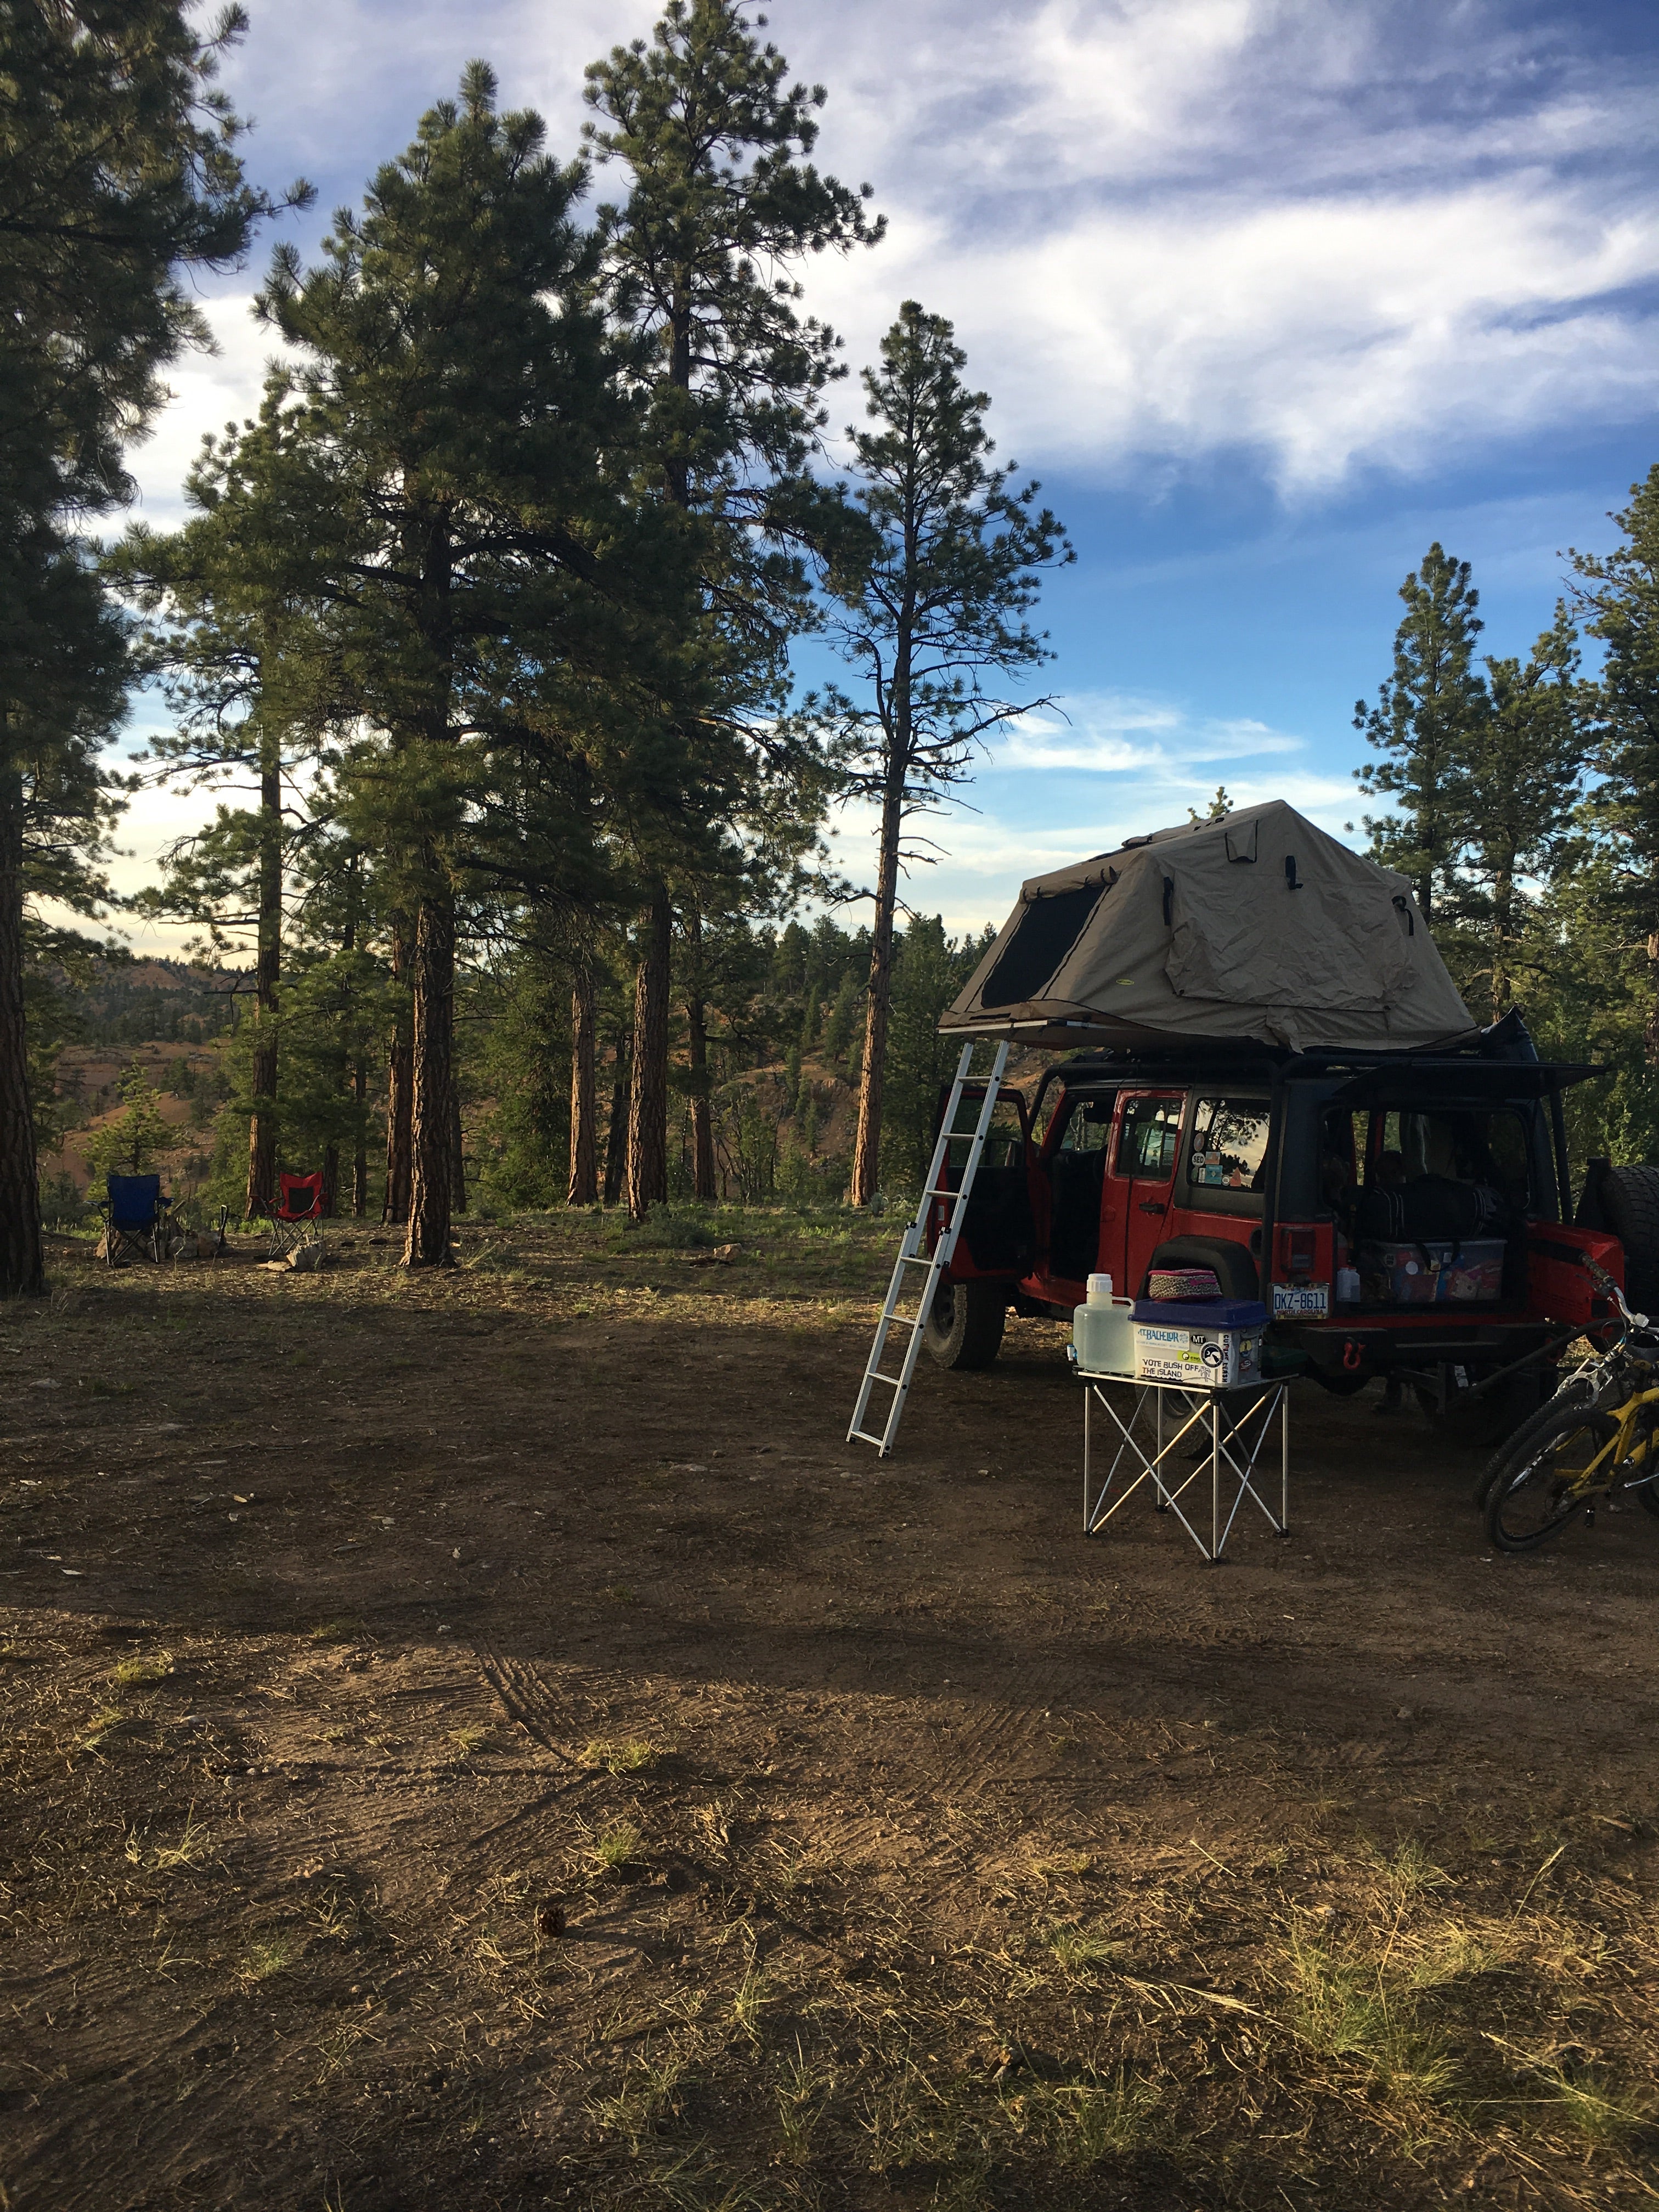 Camper submitted image from FS #117 Rd Dispersed Camping - 3